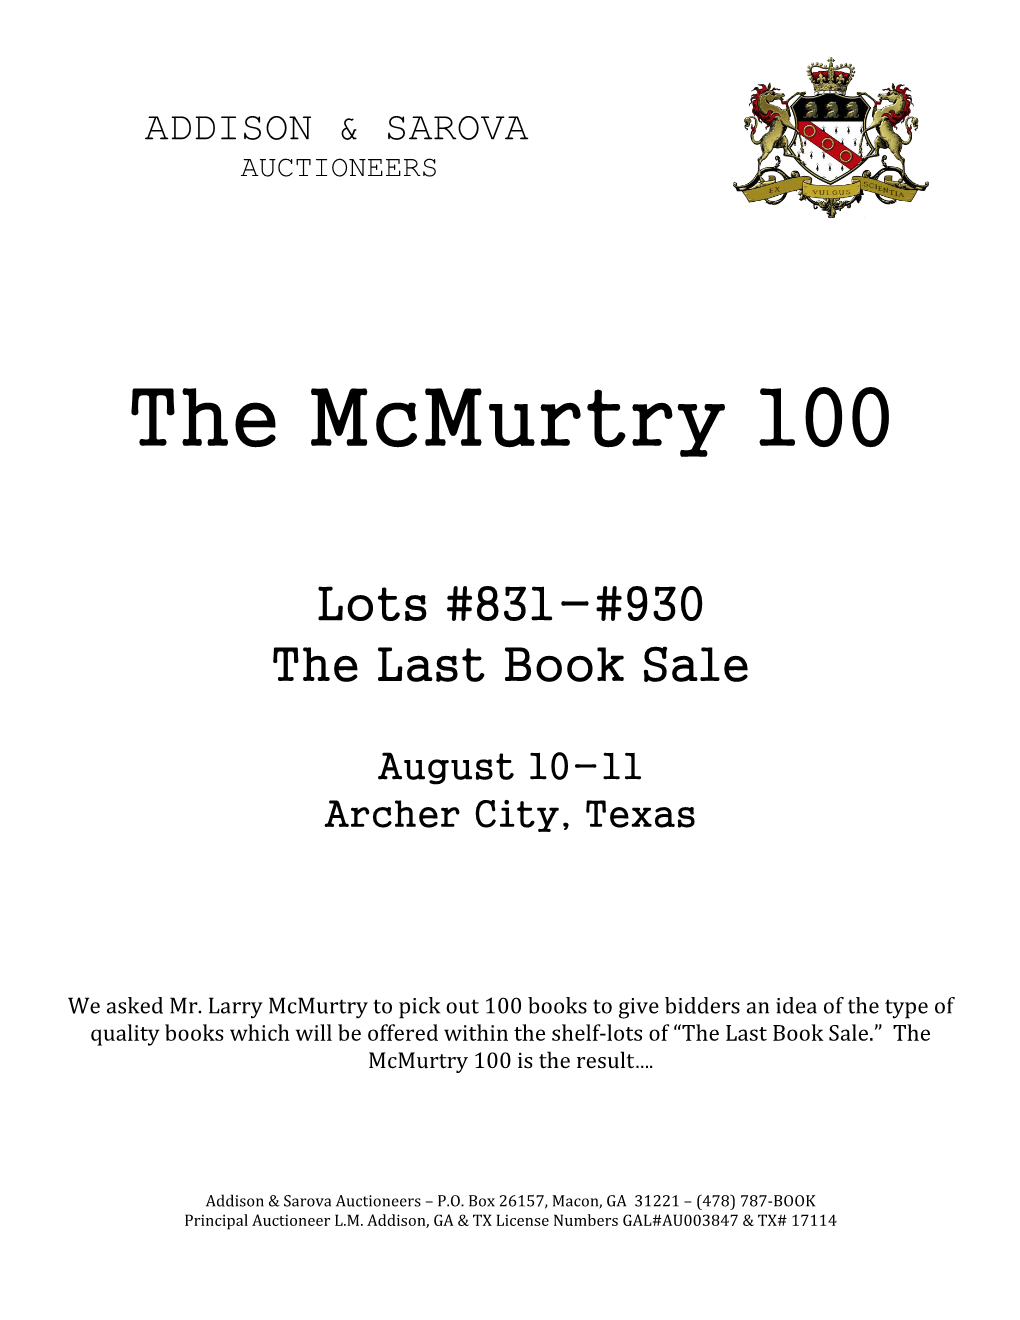 The Mcmurtry 100